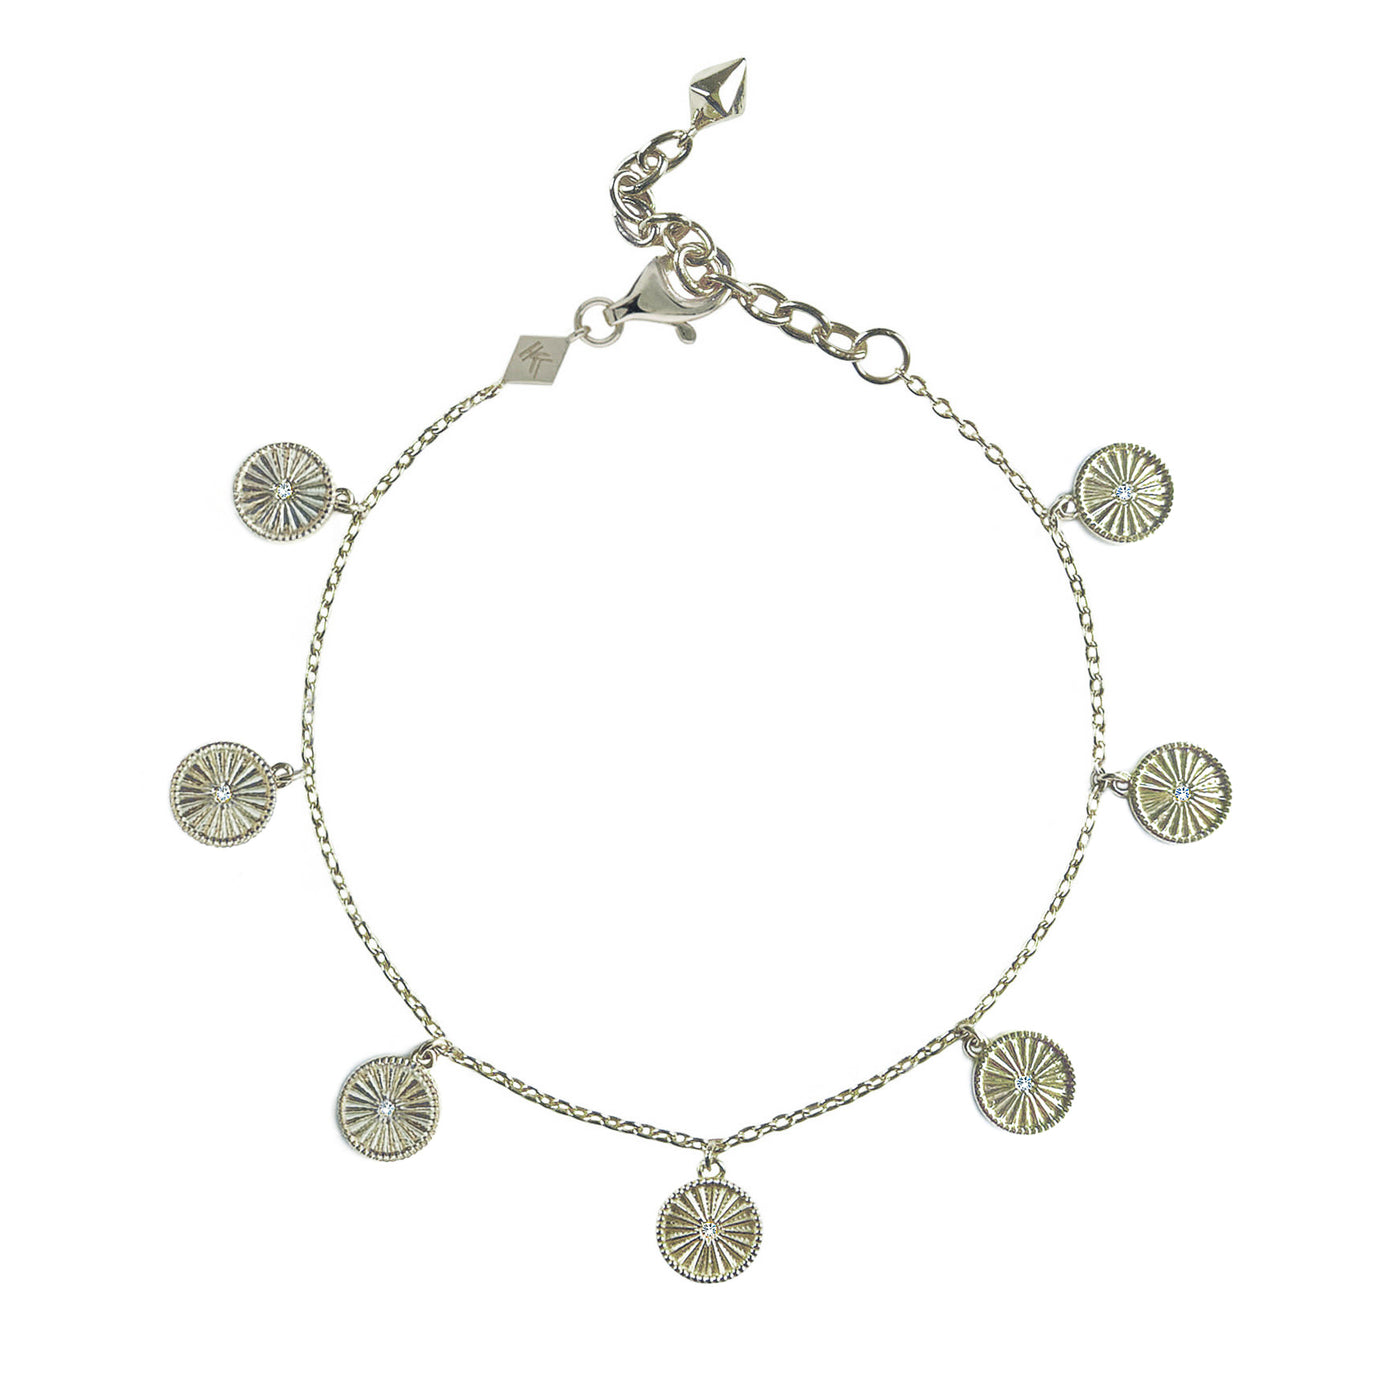 Sterling Silver bracelet with engraved coin hanging charms featuring CZ crystals